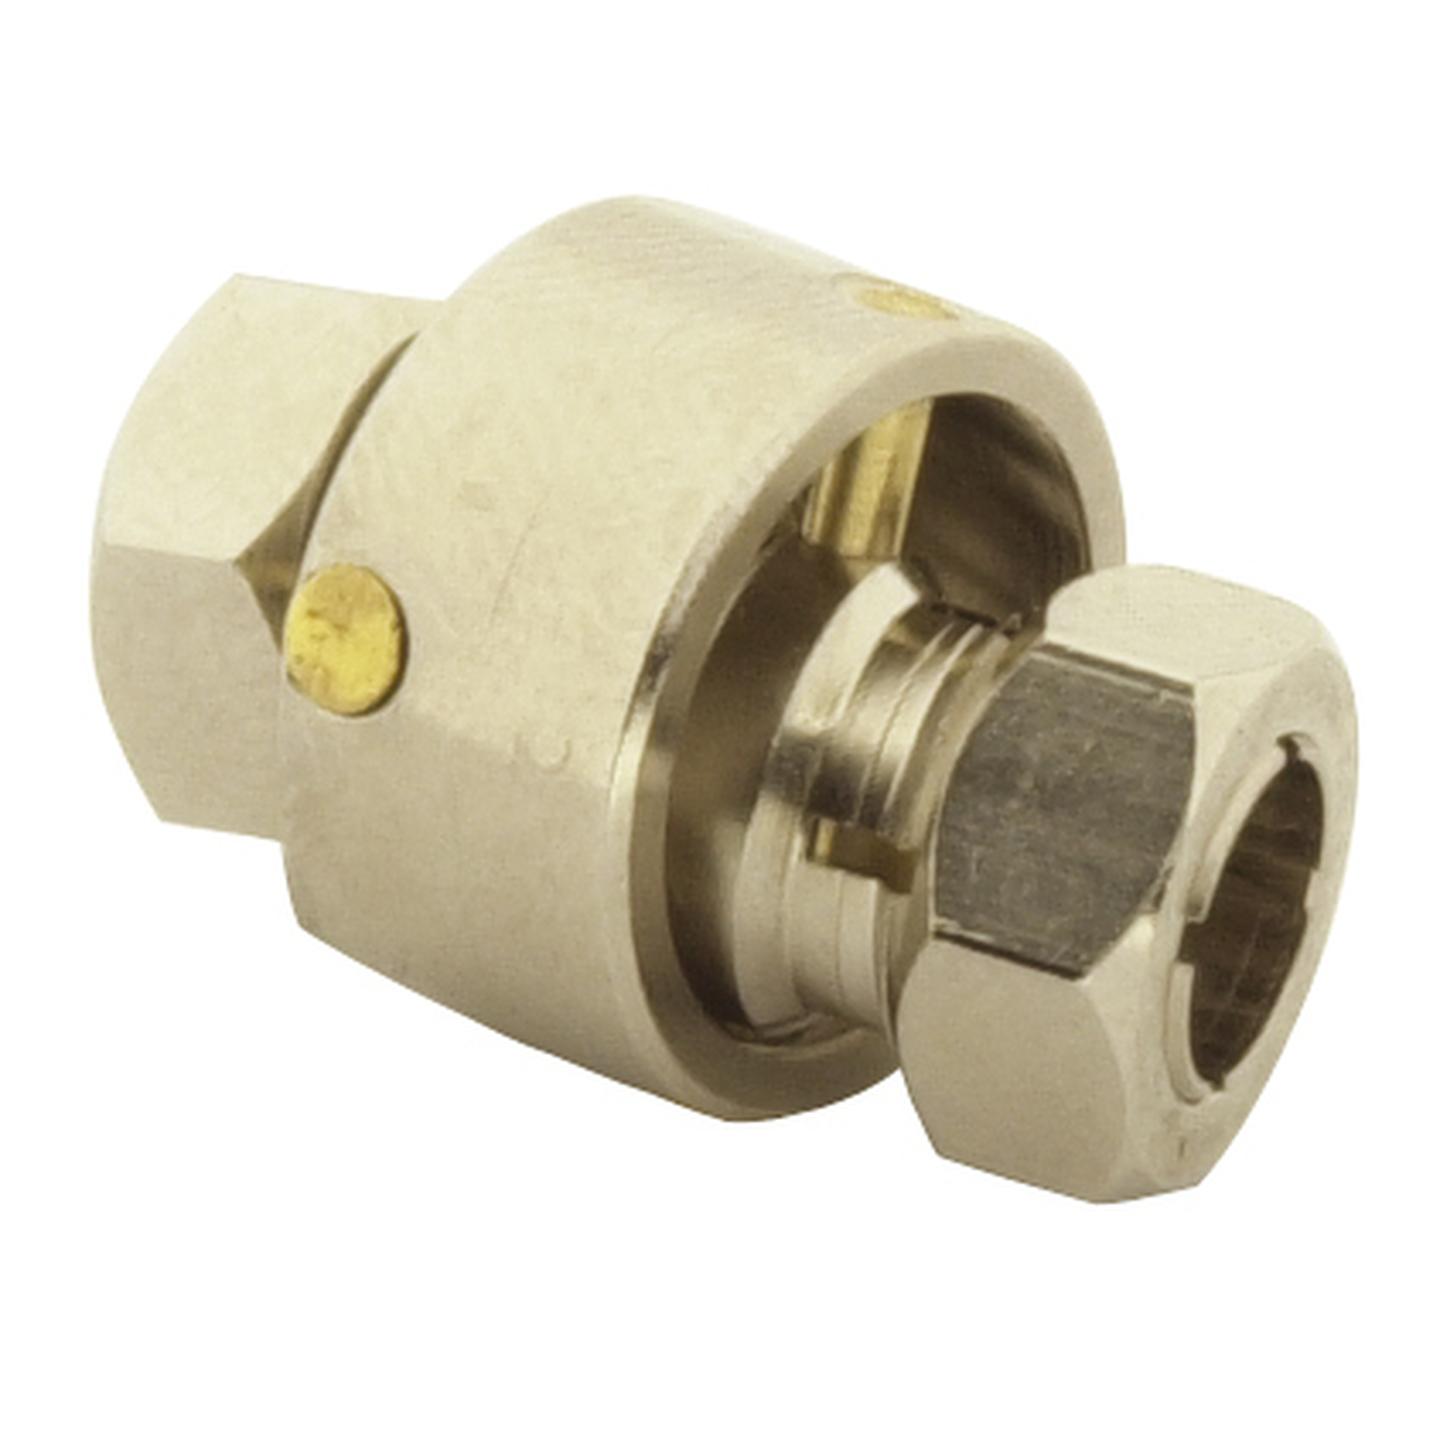 All-Metal Universal Joint Trunnion Style Female 6.0 Dia.